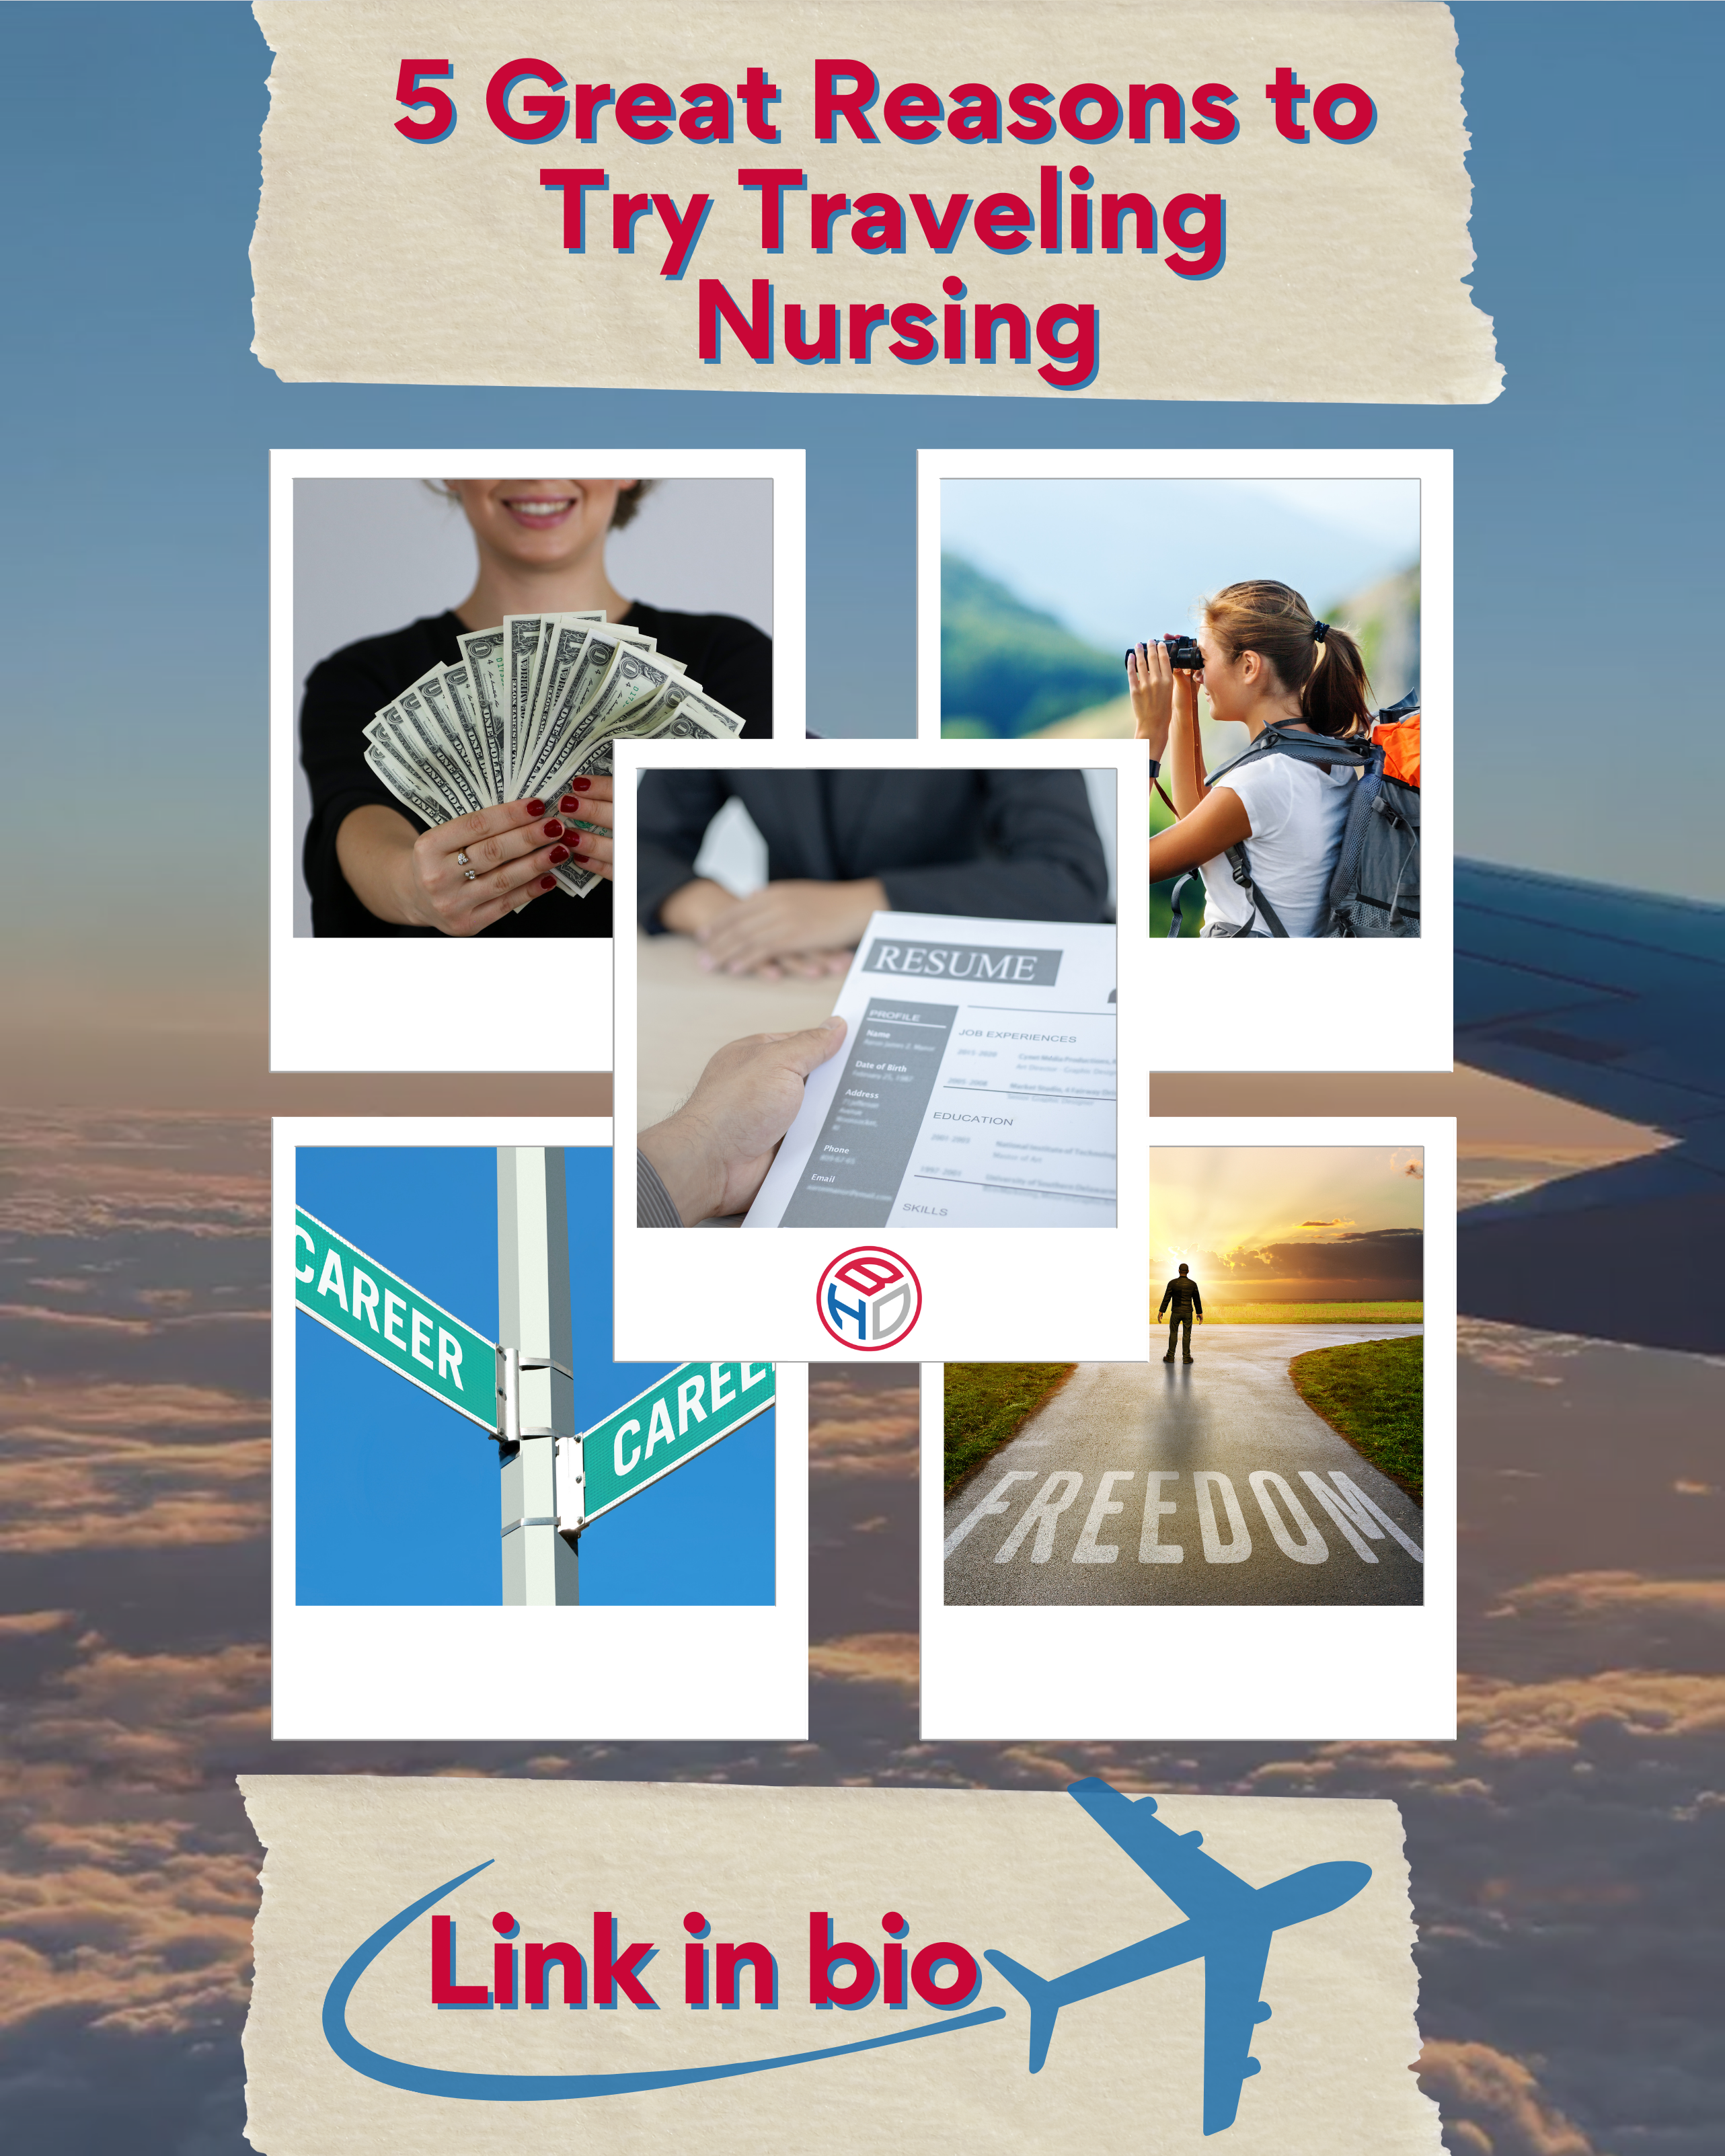 5 Great Reasons to Try Travel Nursing